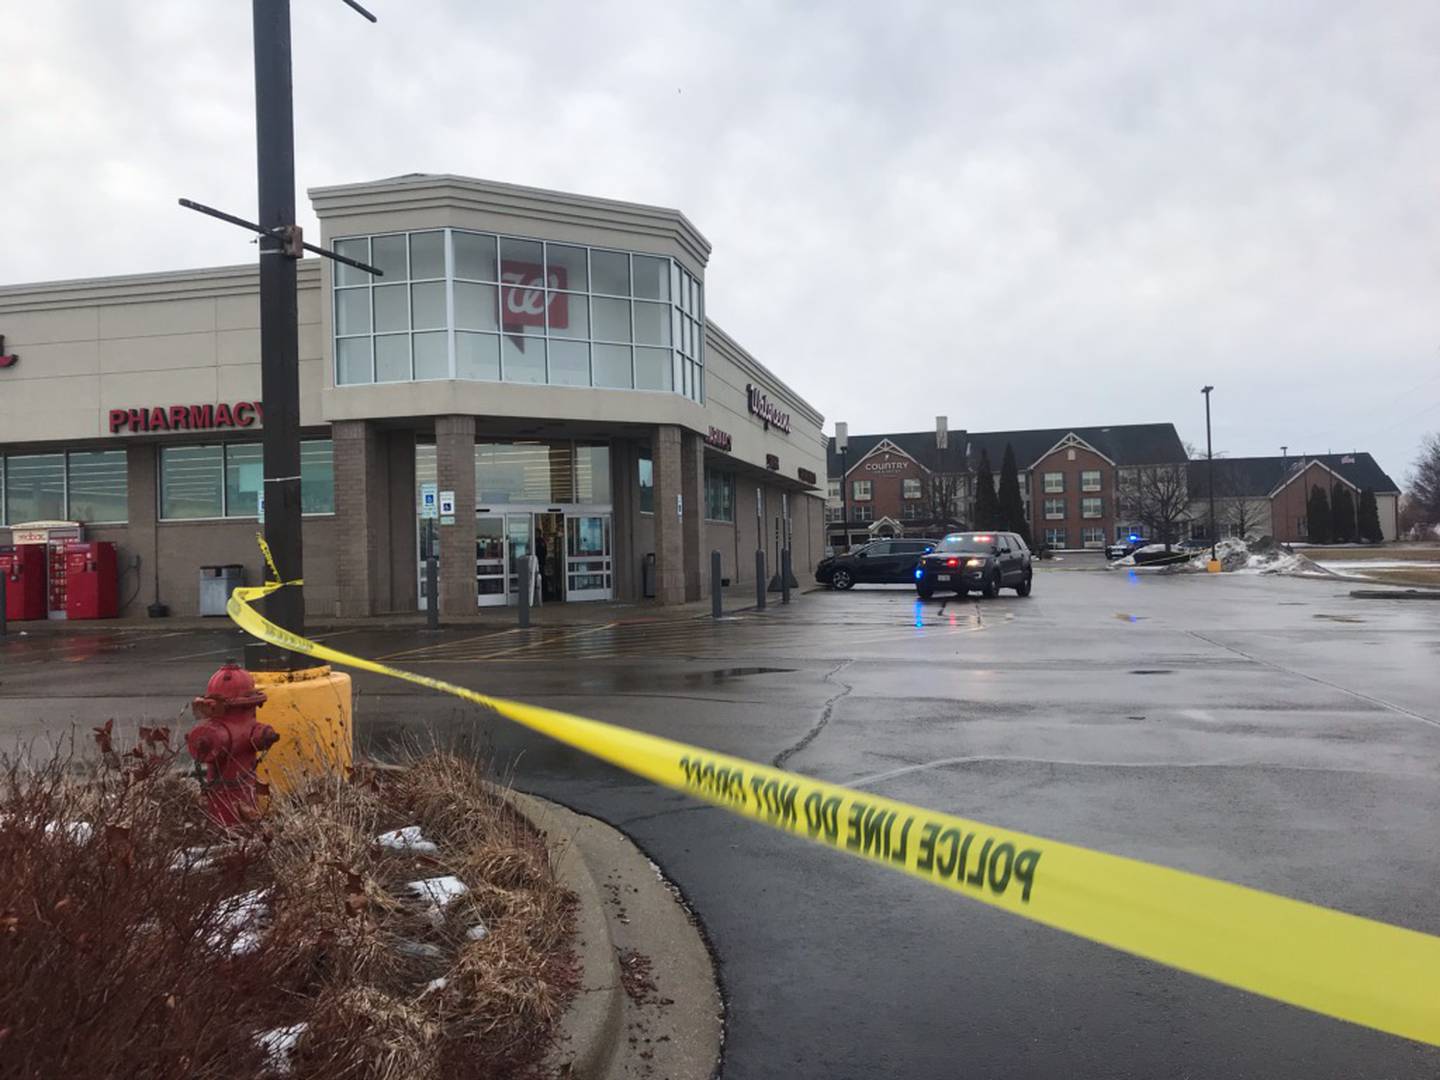 The Walgreens on Peace Road in Sycamore is temporarily closed Friday morning, Feb. 11, 2022, as police investigate an armed robbery, said Sycamore Police Chief Jim Winters.